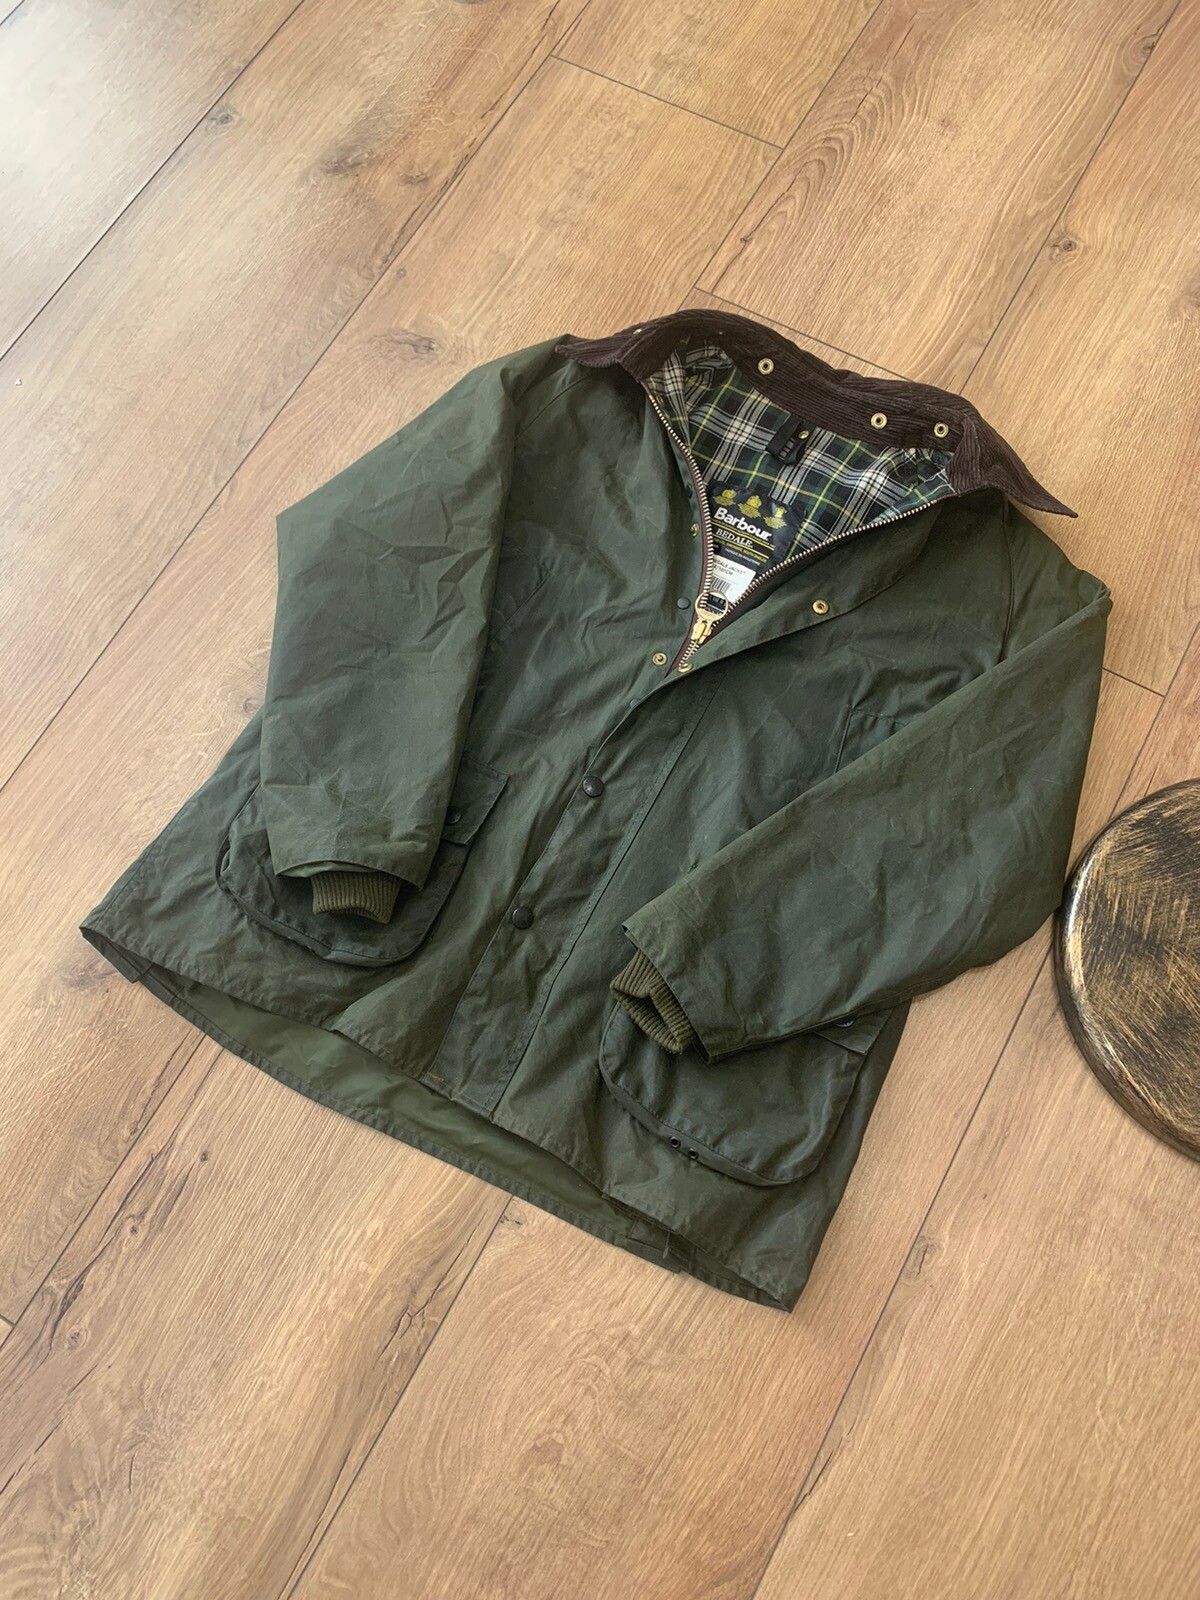 Barbour Barbour Bedale Olive Waxed Coat Jacket A100 C42/107 cm | Grailed